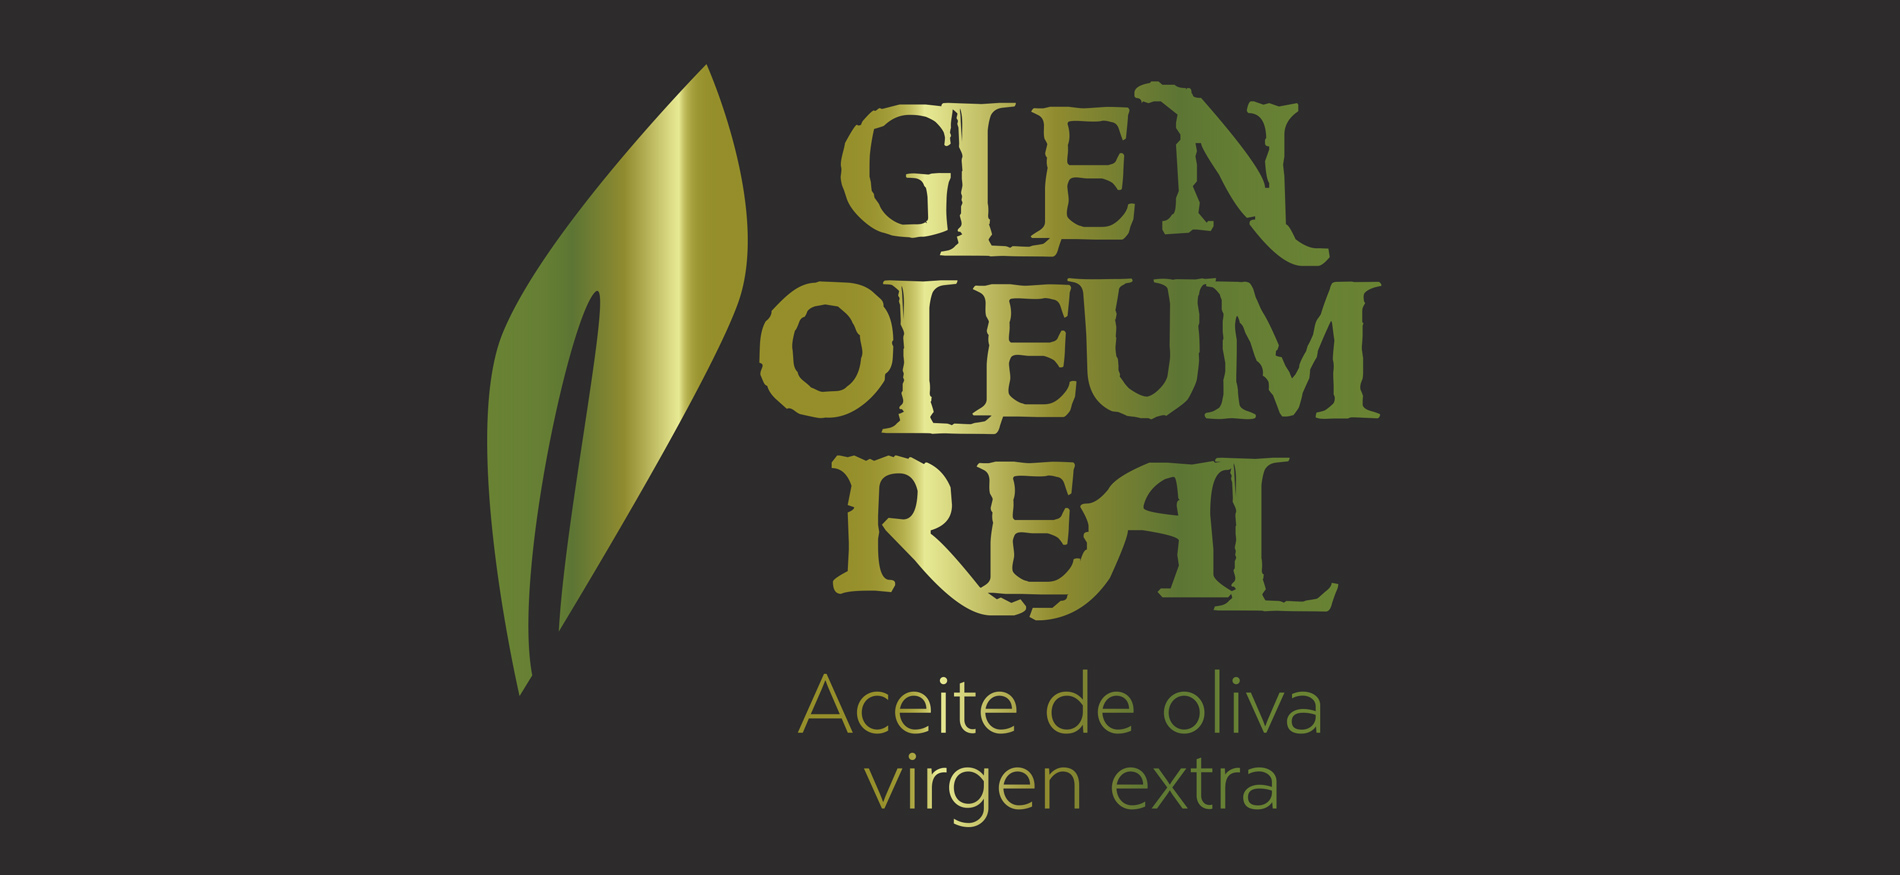 Portfolio of graphic and creative design works of extra virgin olive oil label design and packaging for GLEN OLEUM REAL